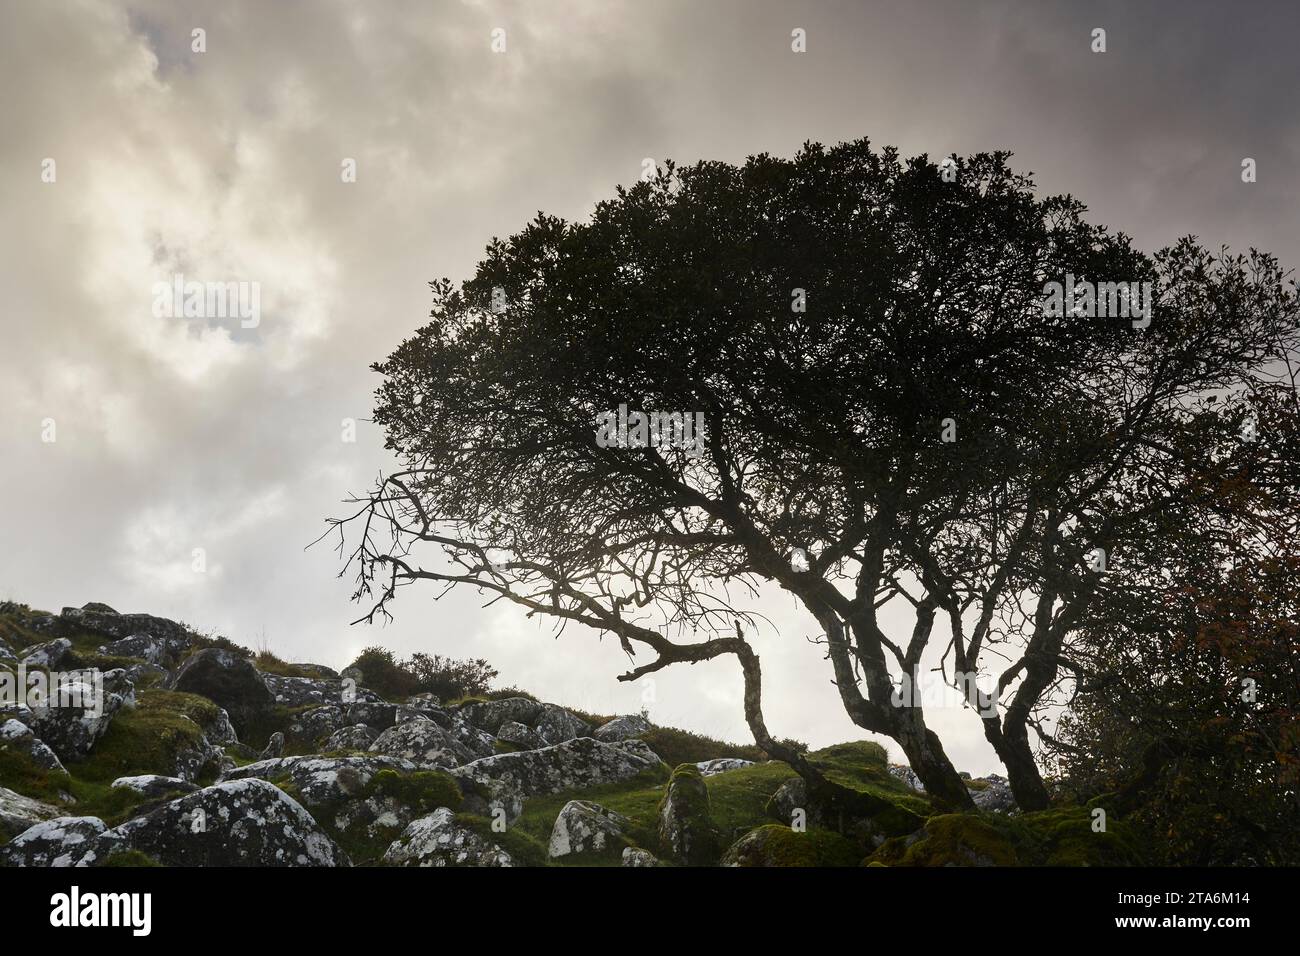 Silhouette of a moorland hawthorn tree against a stormy sky; on Gidleigh Common, near Chagford, Dartmoor National Park, Devon, Great Britain. Stock Photo